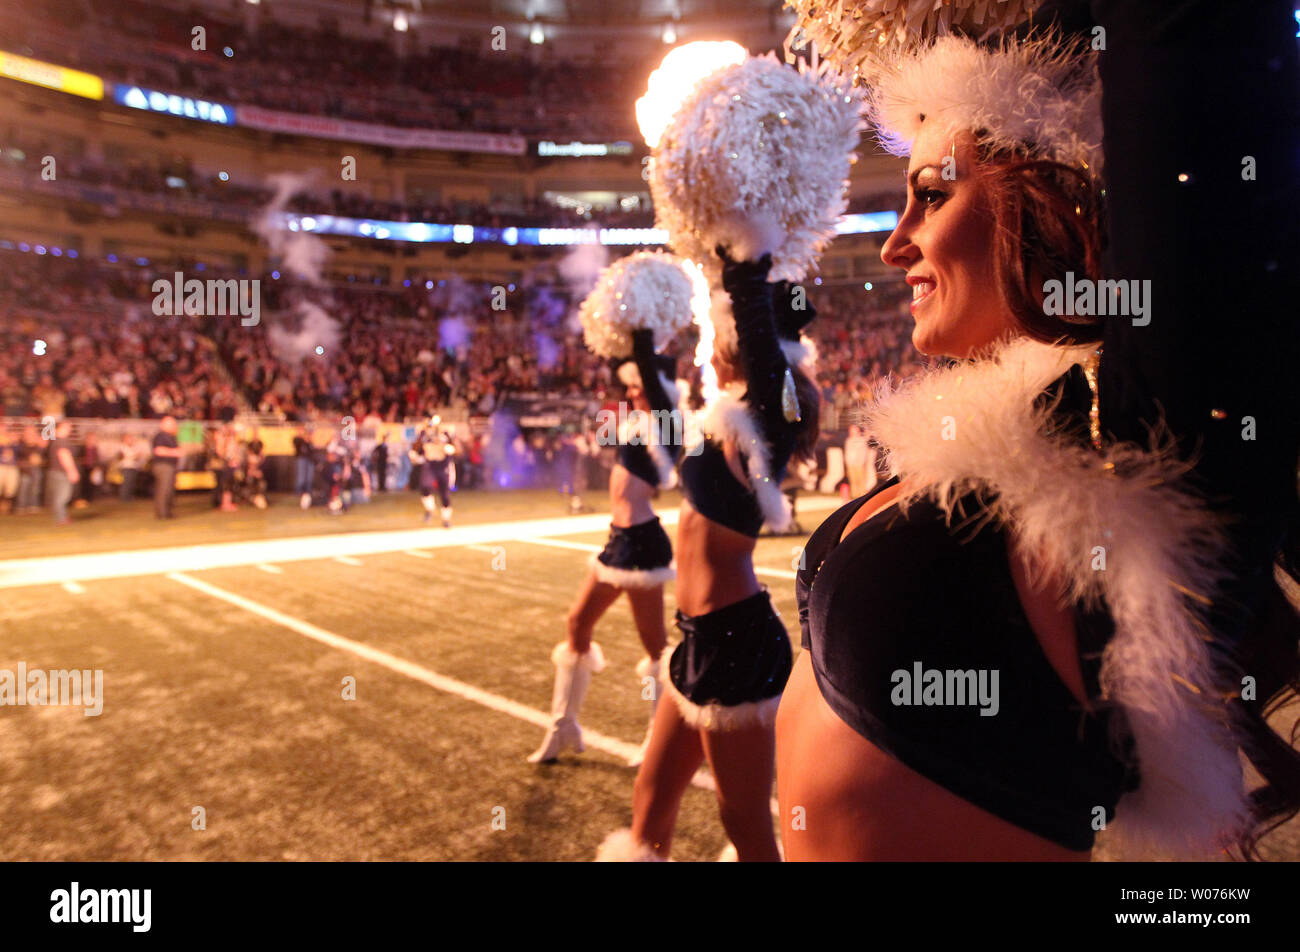 St. Louis Rams cheerleaders cheer as the team is introduced before a game against the Minnesota Vikings at the Edward Jones Dome in St. Louis on December 16, 2012.   UPI/Bill Greenblatt Stock Photo